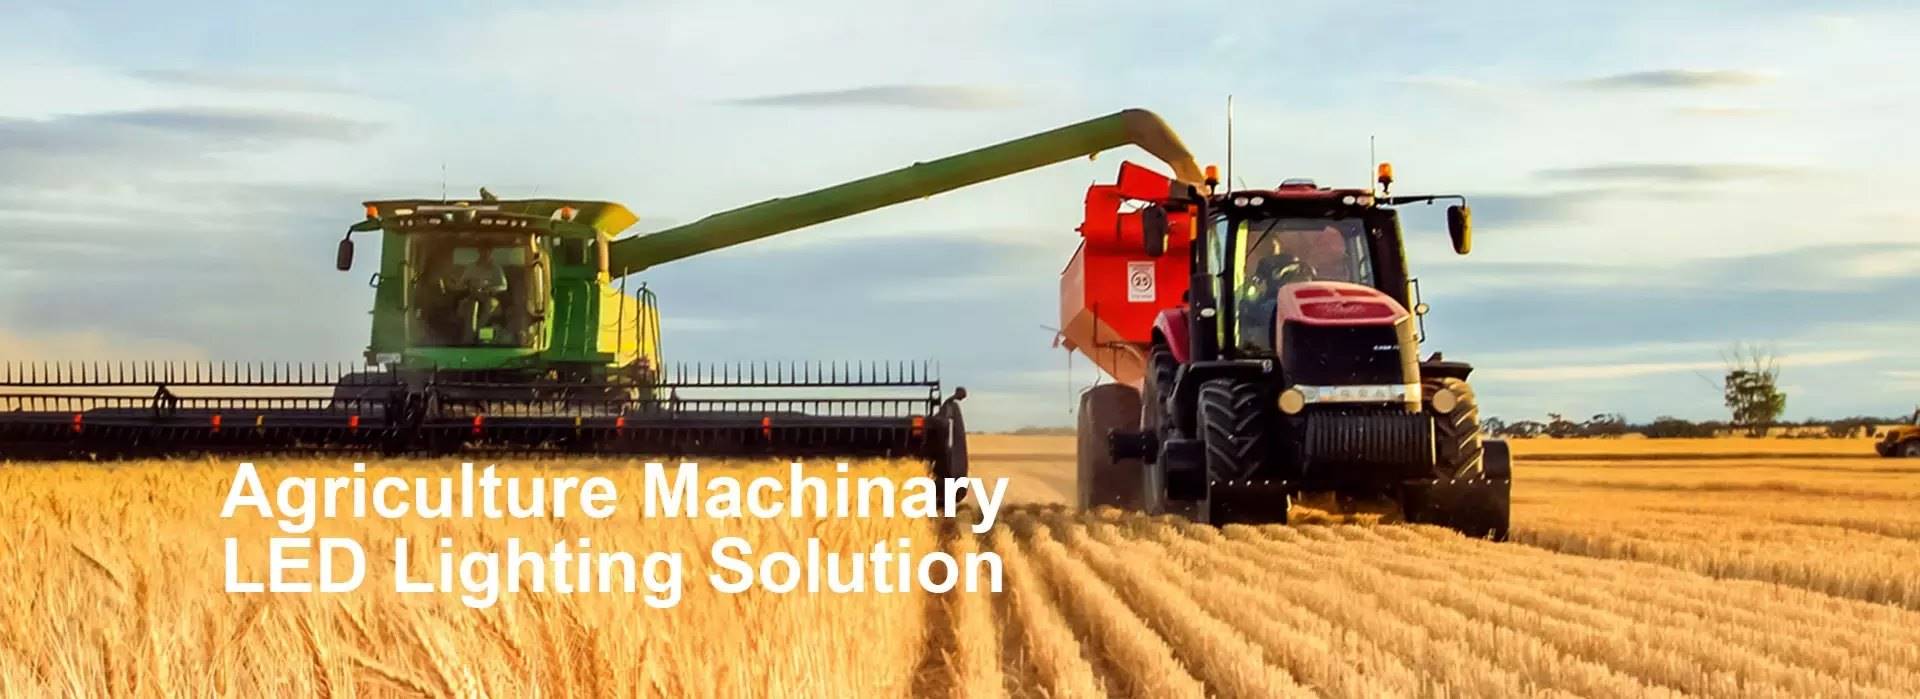 Agriculture tractor Machinary LED Lighting Solution-nokpro